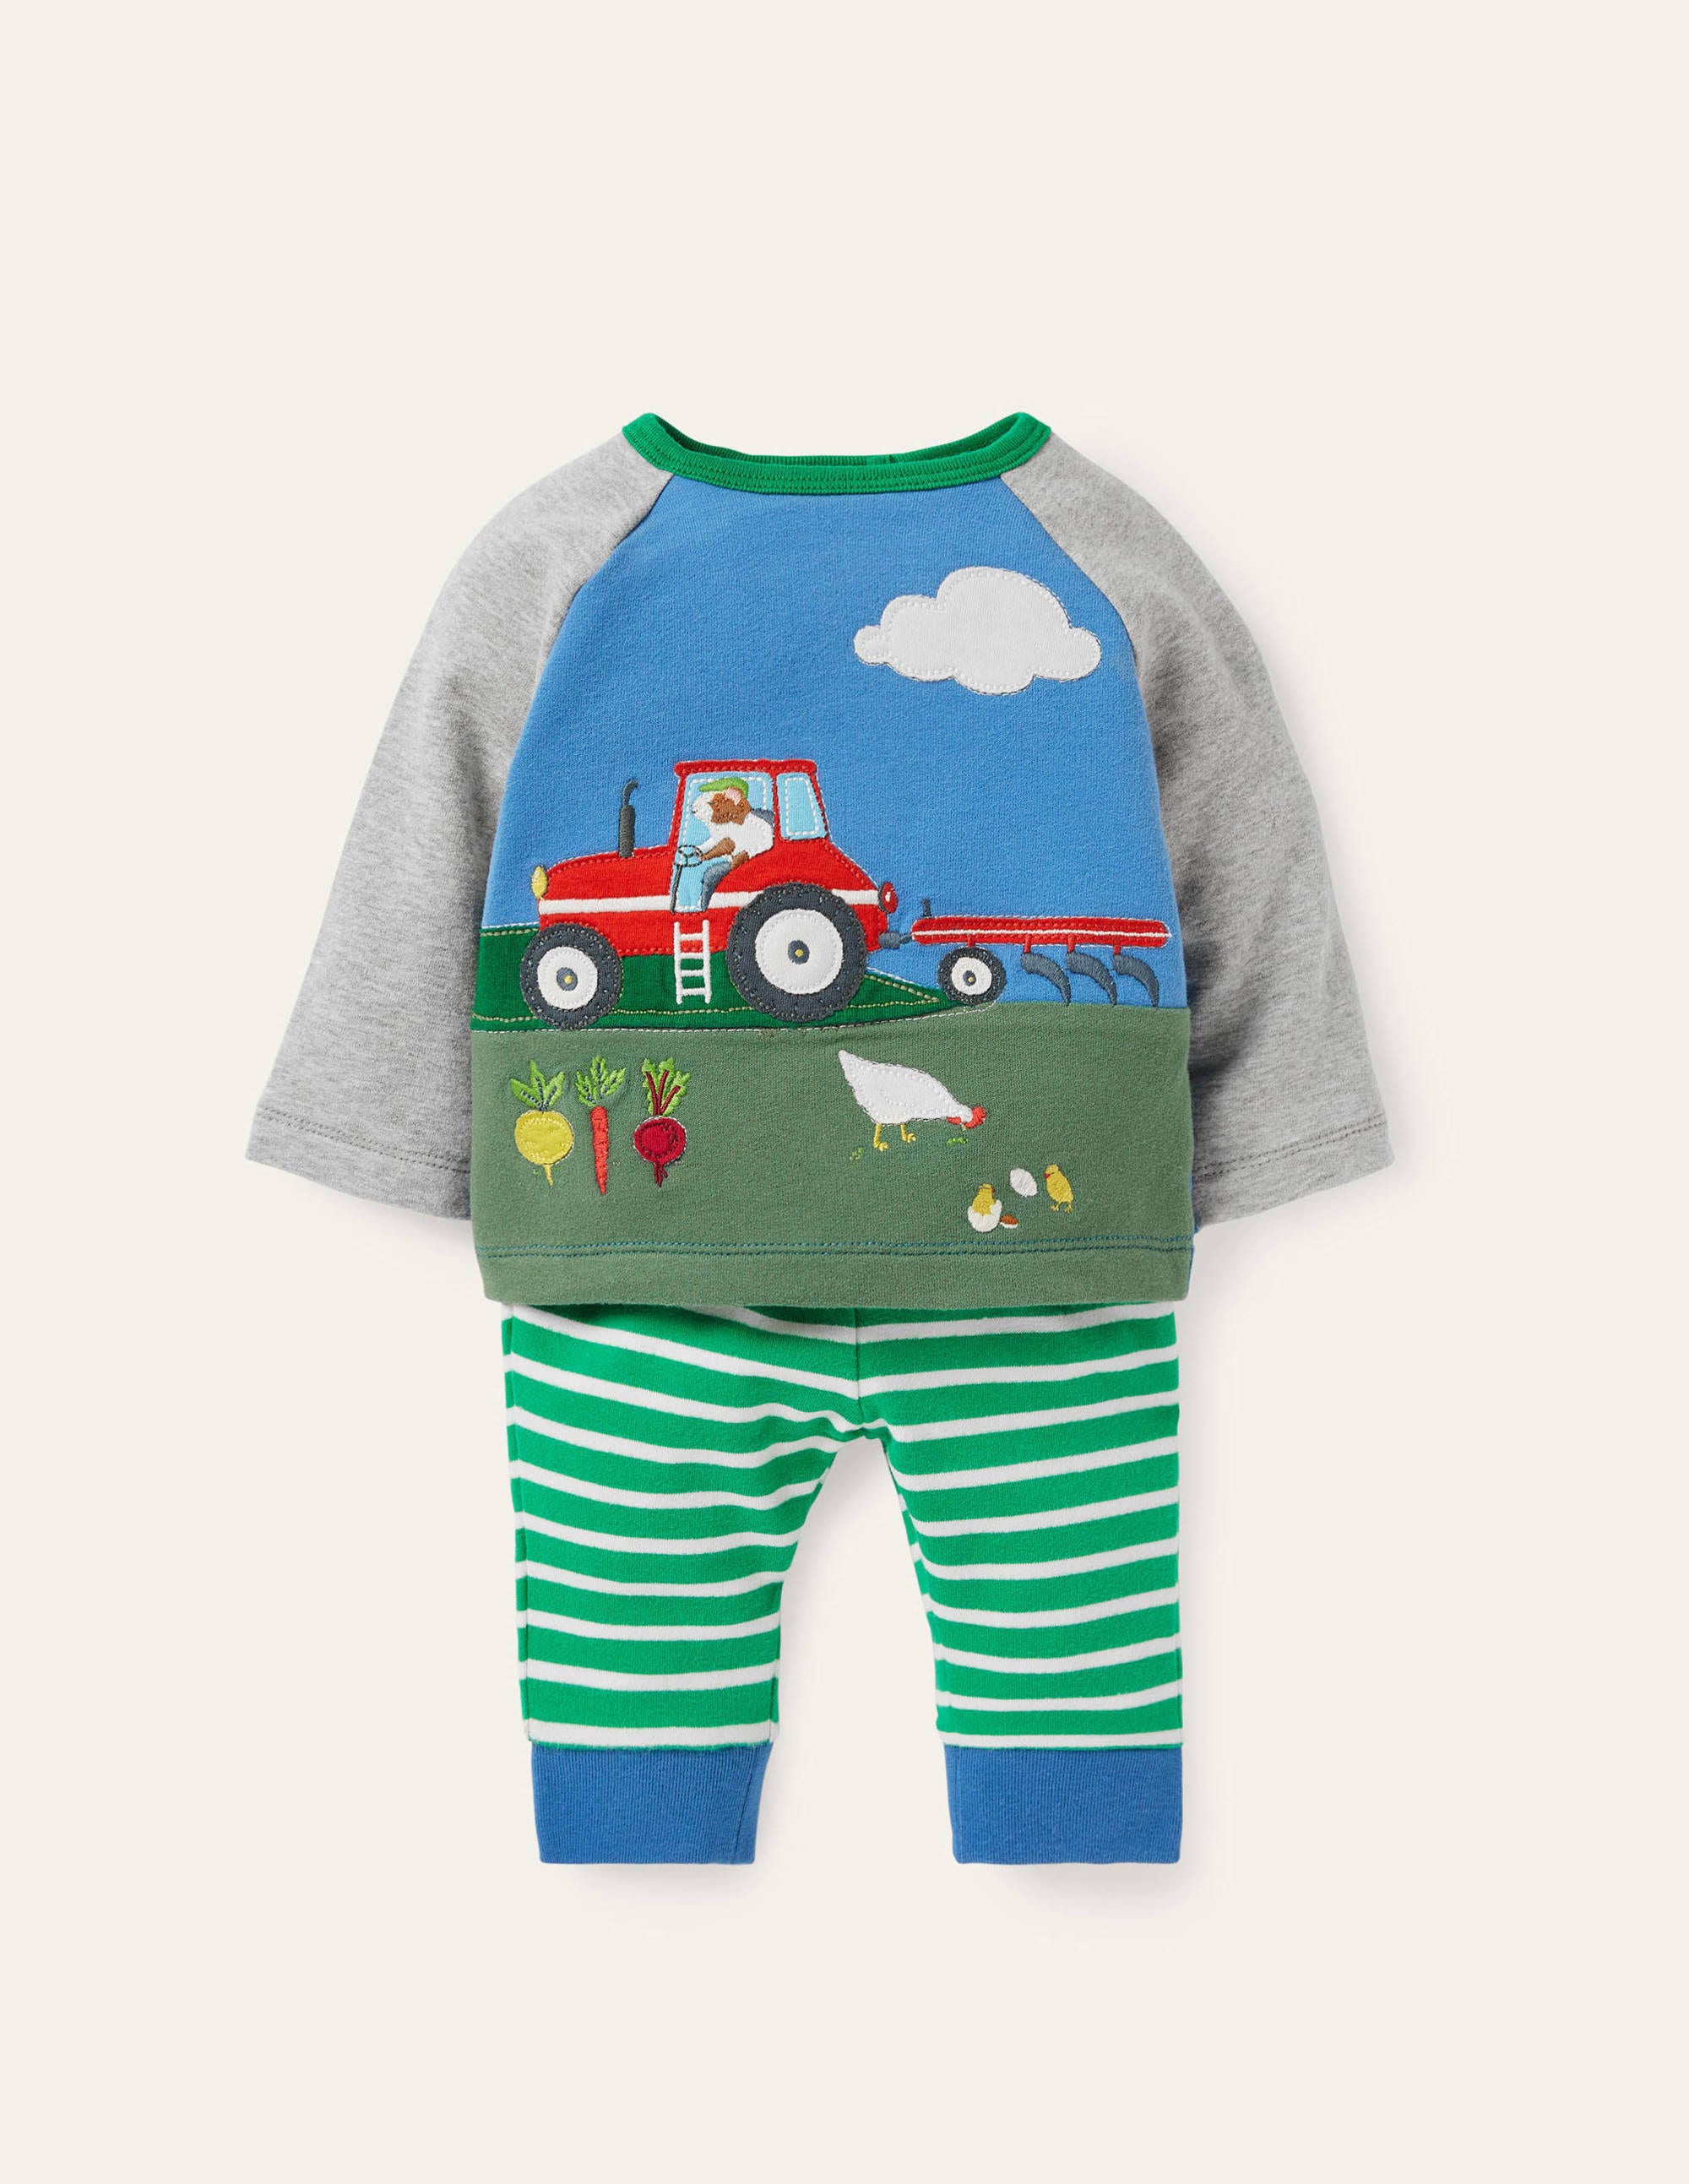 Tractor Farm Boy Green Tractor Red Tractor Blue Tractor Leggings or Joggers